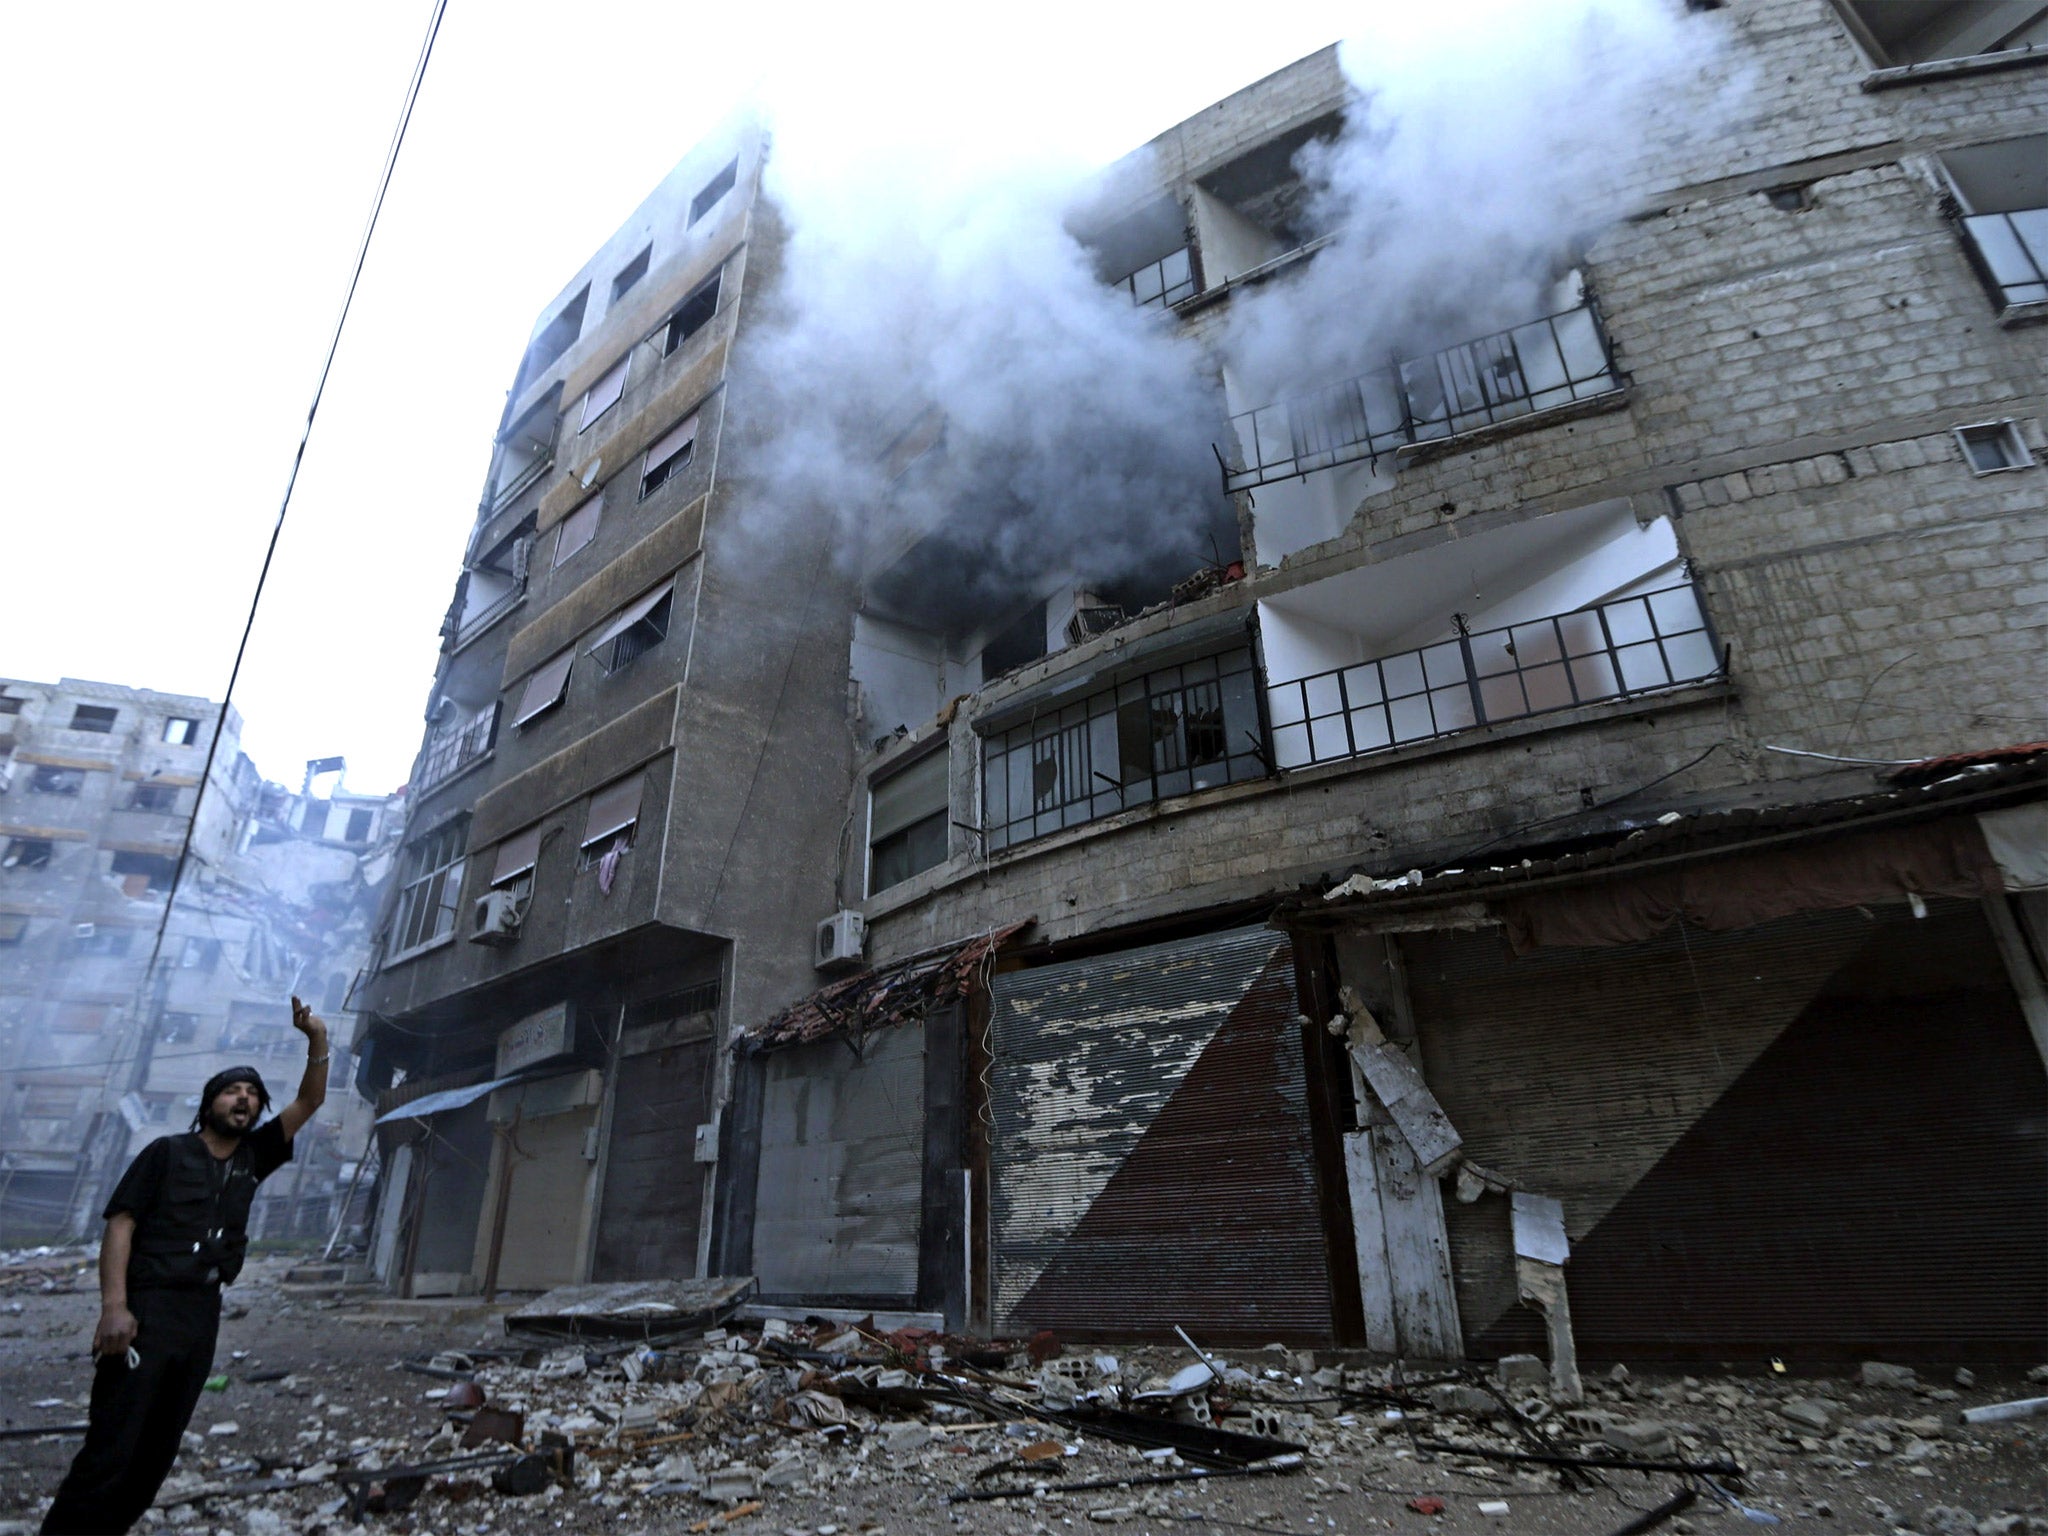 A Free Syrian Army fighter gestures in an empty street in front of a burning building hit by a mortar shell fired by Syrian Army soldiers in the Zamalka neighbourhood of Damascus